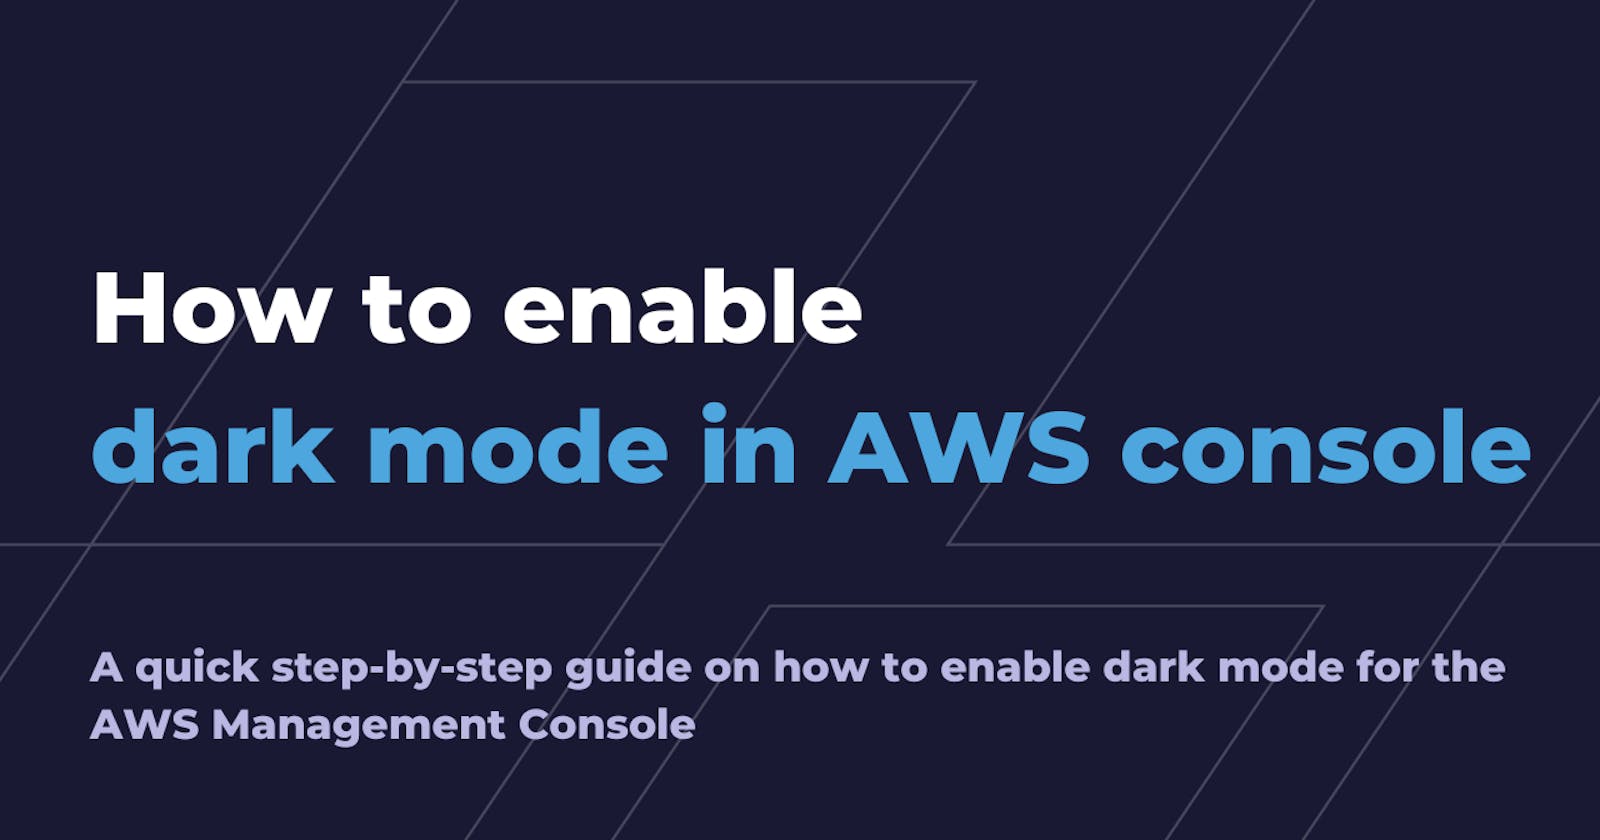 How to enable dark mode in AWS console